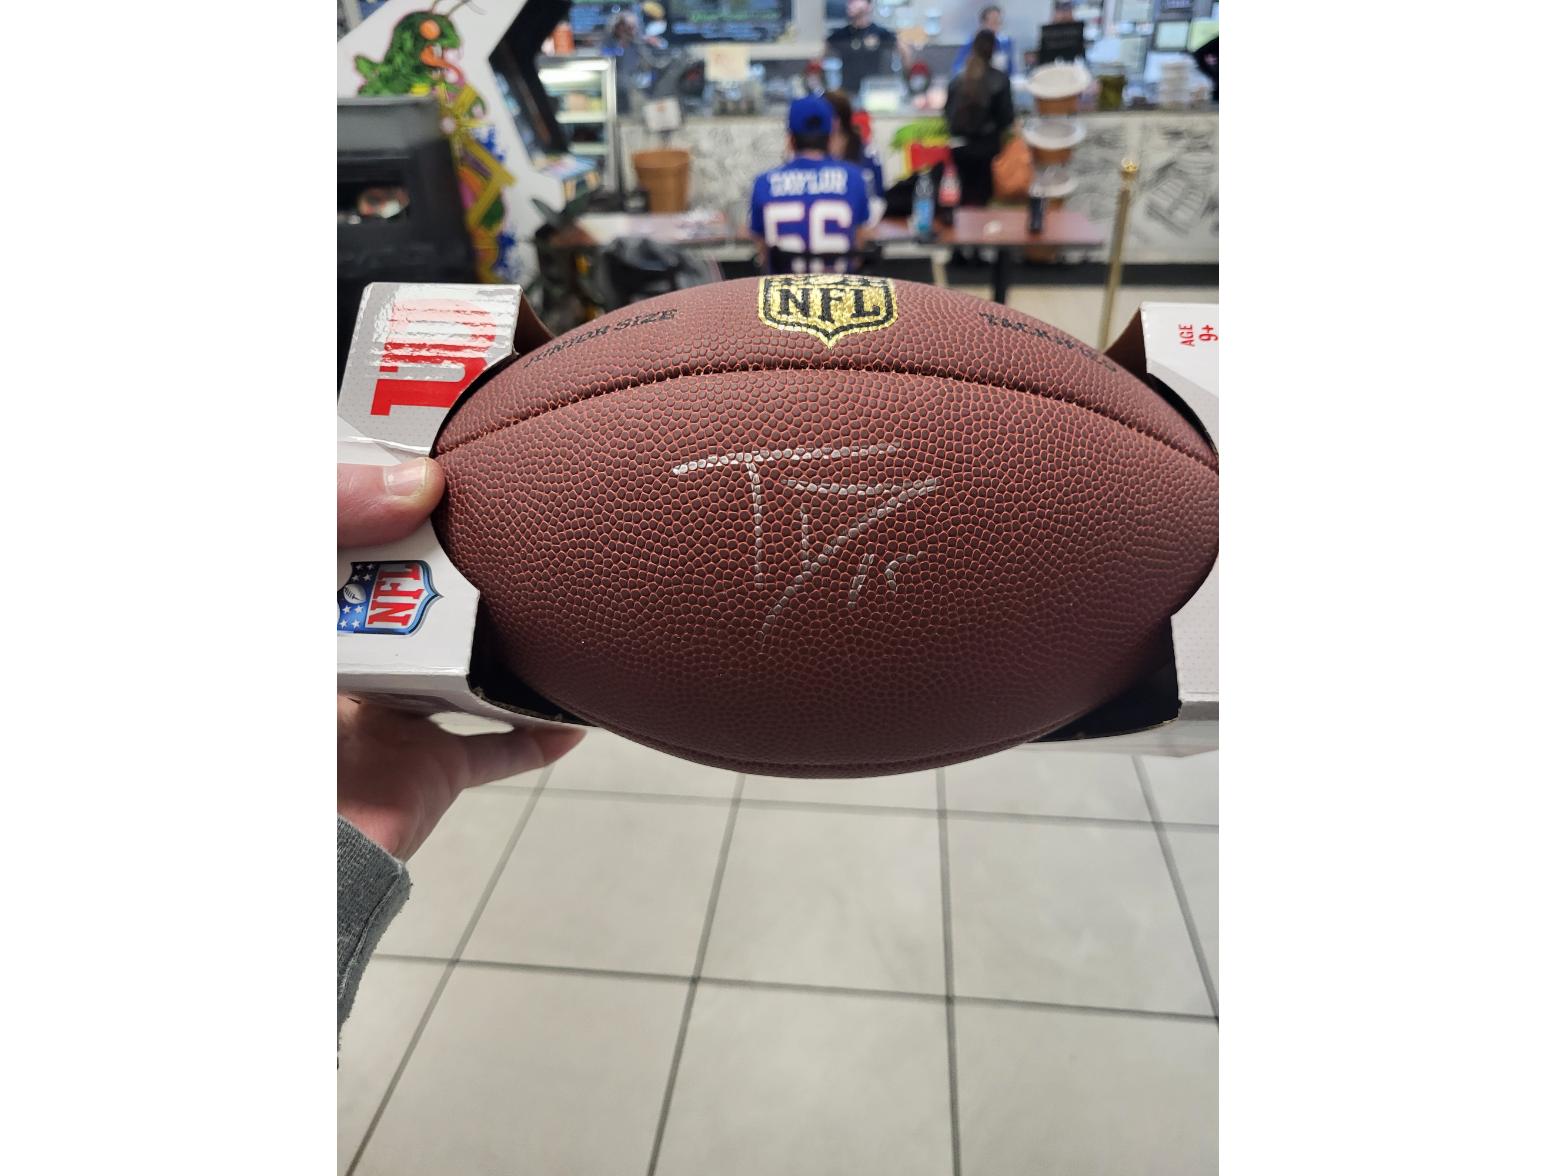 Tommy DeVito From NY Giants Autographed Football 